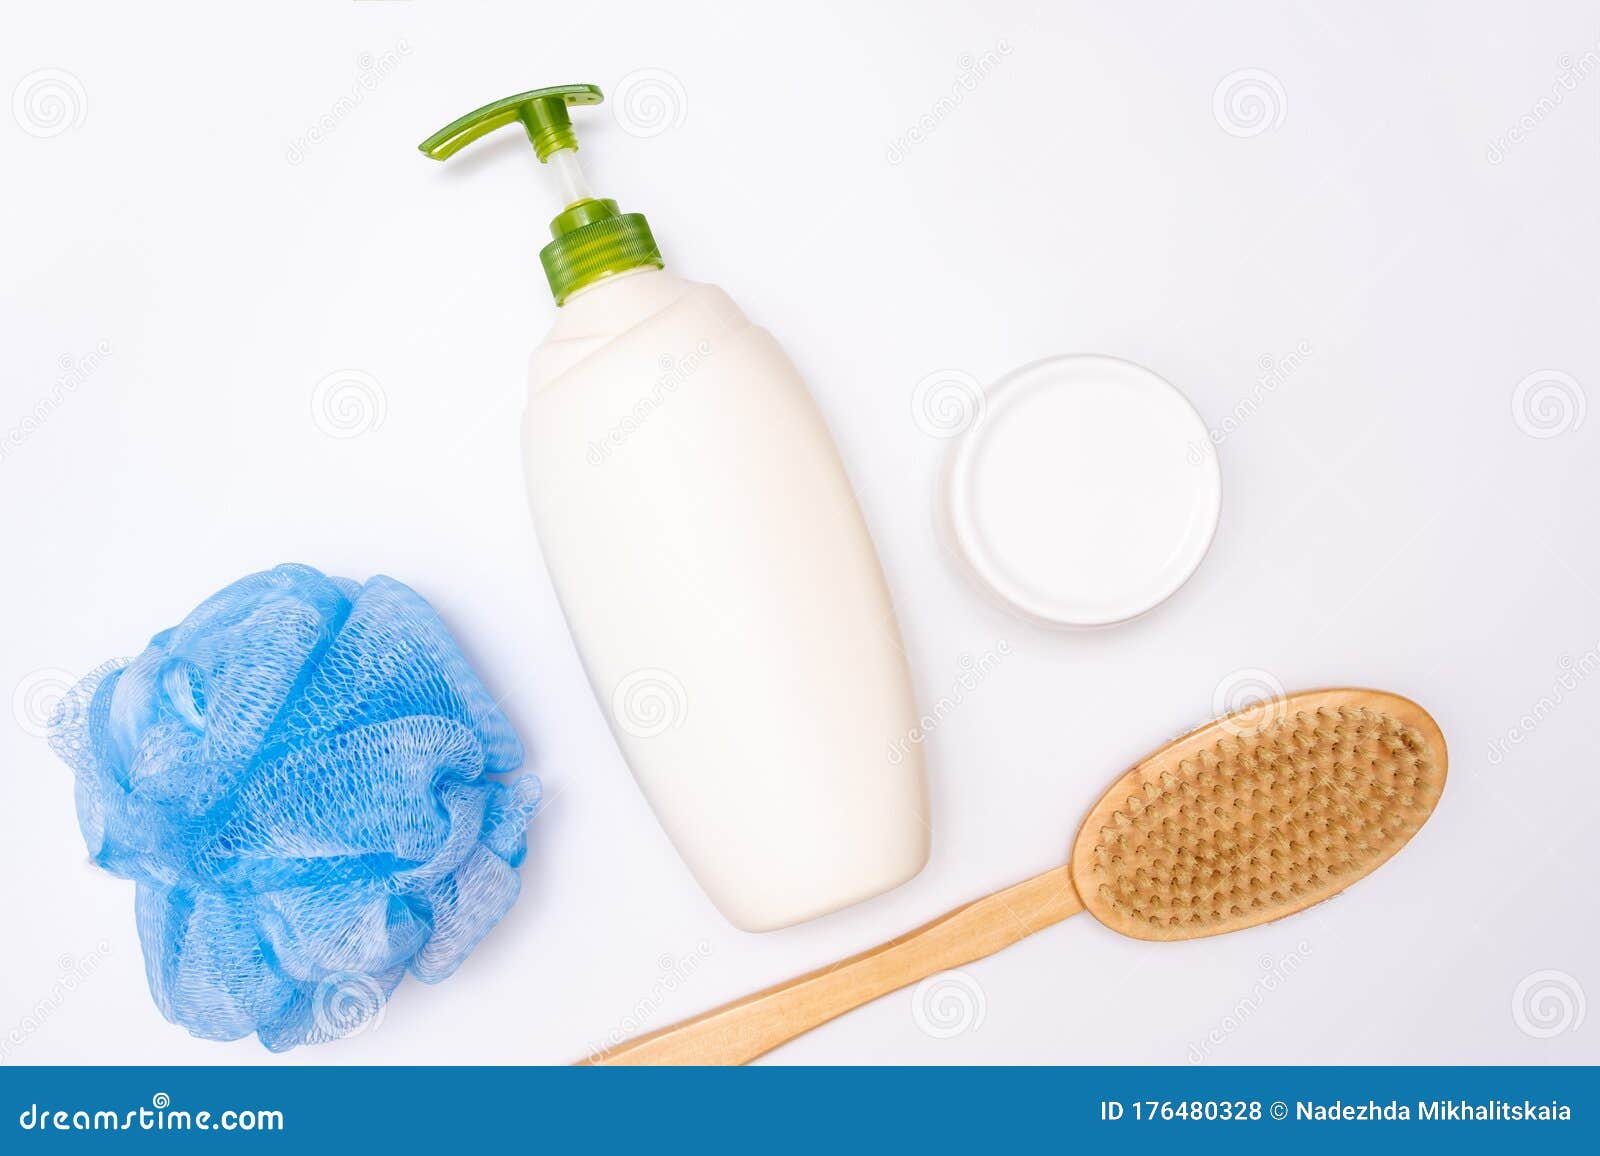 Many Bath Shower Accessories On White Background Shower Gel Body Wash In Plastic Bottles Wooden Brush Skin Cream And A Sponge Stock Photo Image Of Cosmetic Clearing 176480328